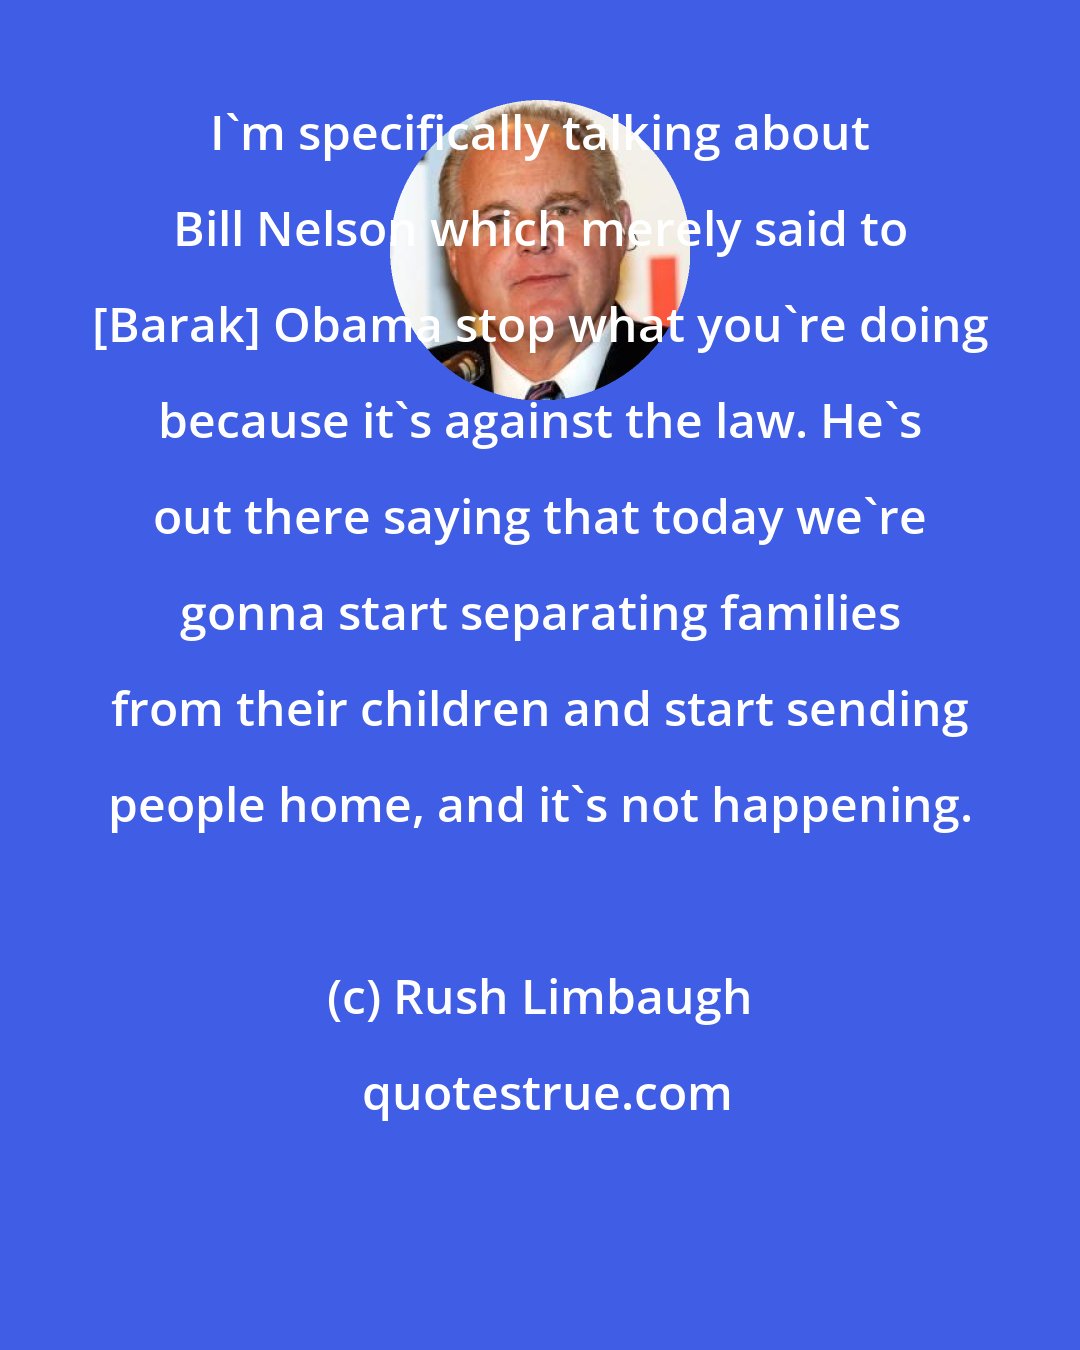 Rush Limbaugh: I'm specifically talking about Bill Nelson which merely said to [Barak] Obama stop what you're doing because it's against the law. He's out there saying that today we're gonna start separating families from their children and start sending people home, and it's not happening.